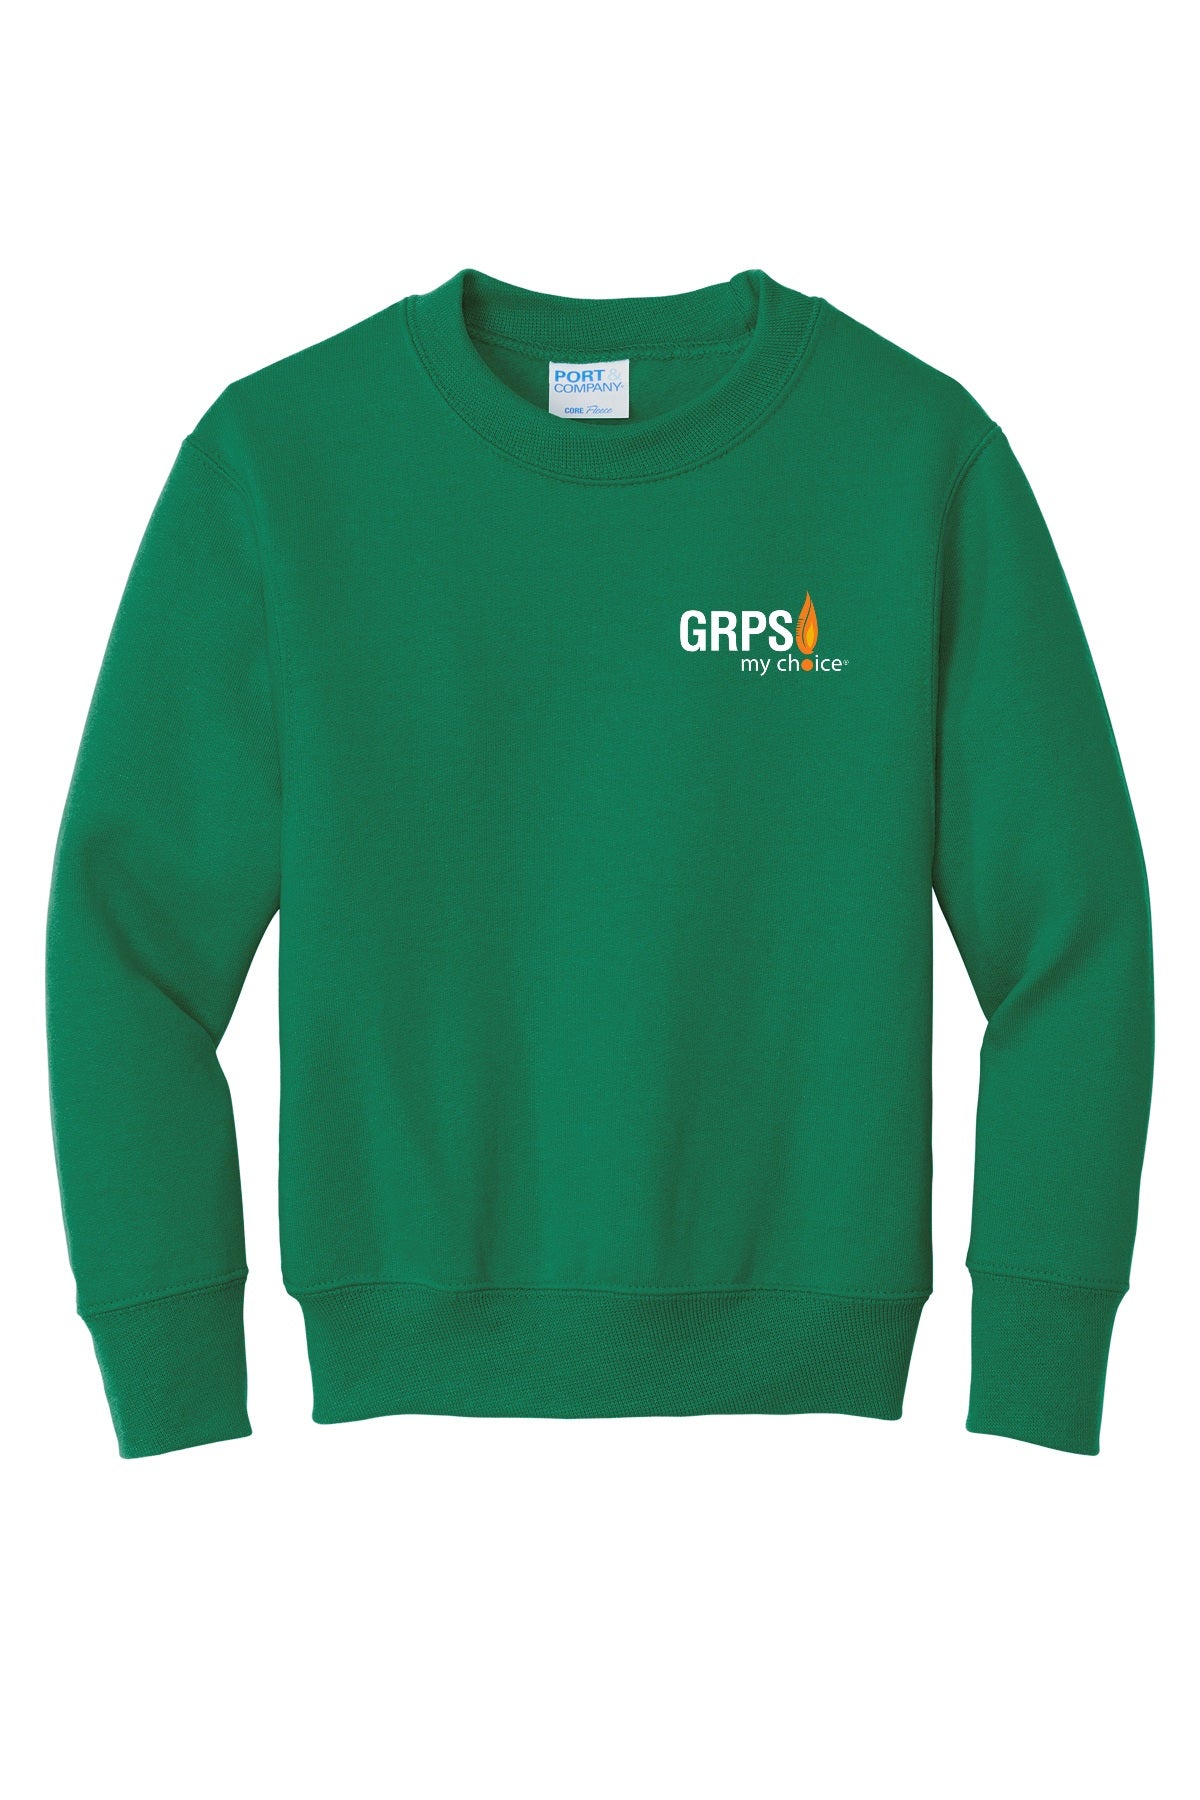 Youth crew neck-MY CHOICE GRPS